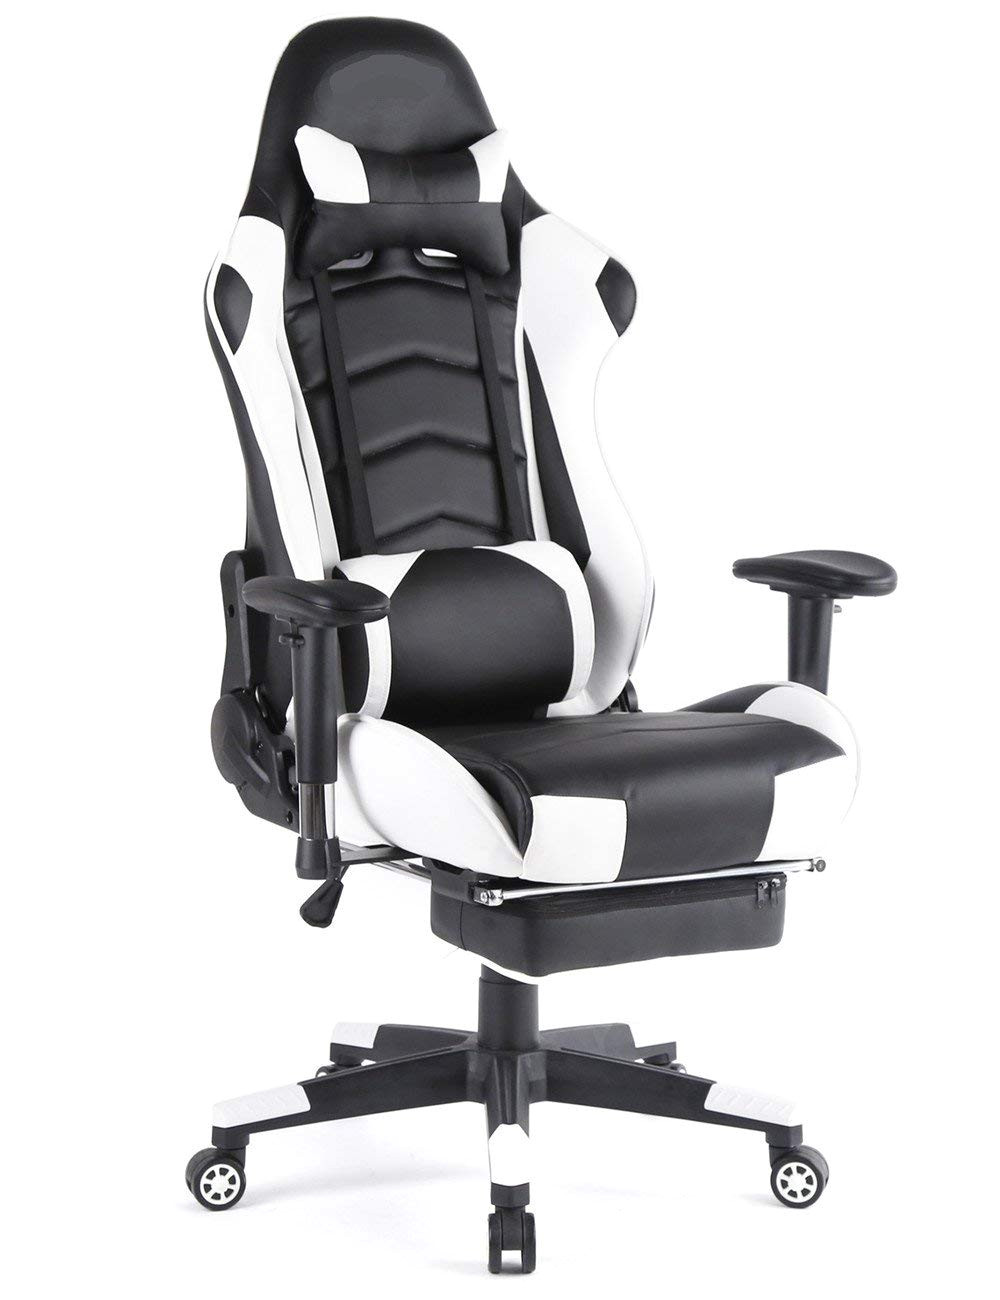 Office Chair with Footrest Walmart | AdinaPorter